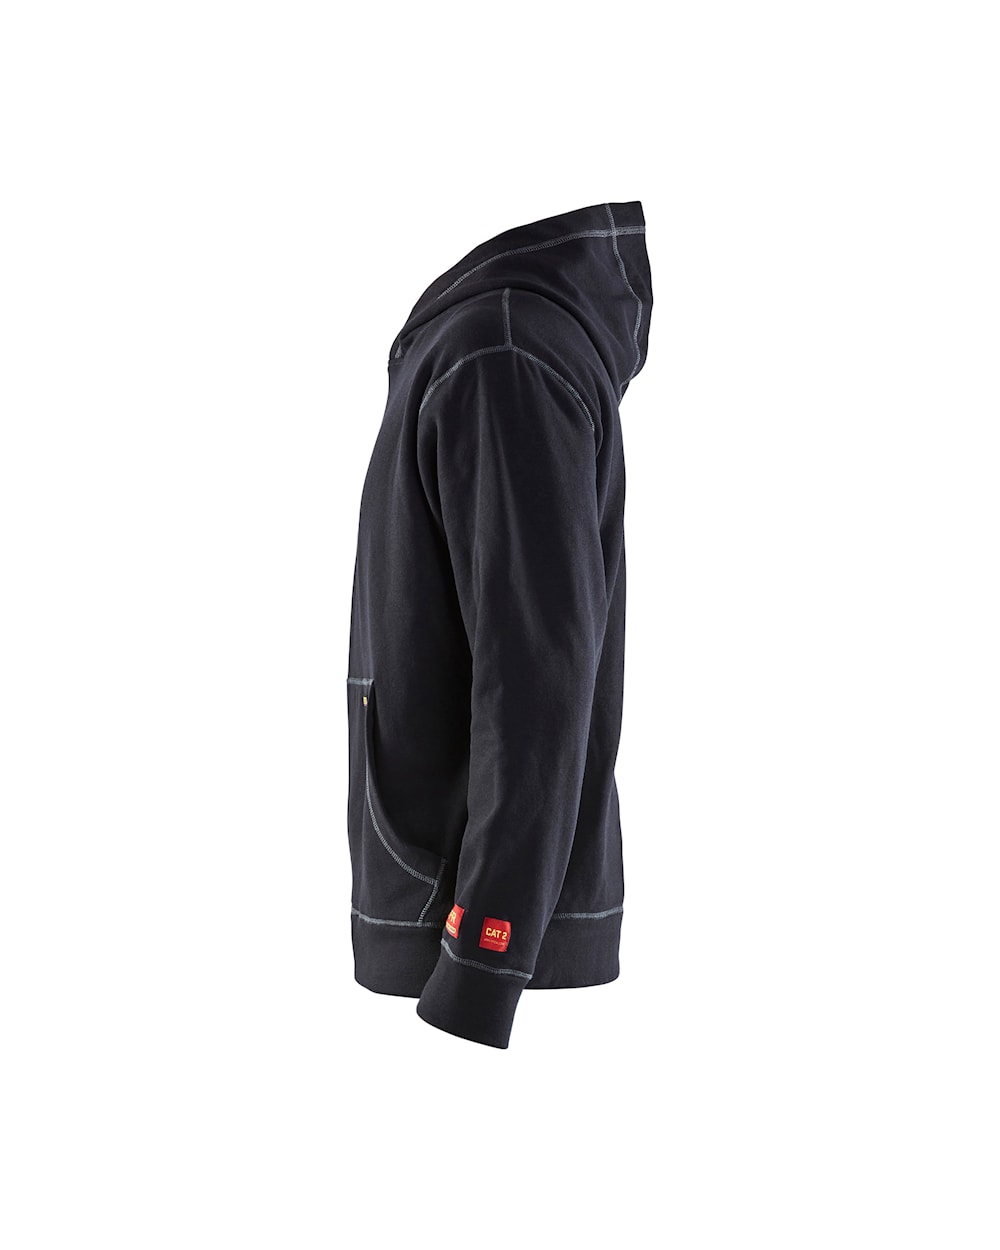 Blaklader Fire Resistant Hoodie - Large from Columbia Safety